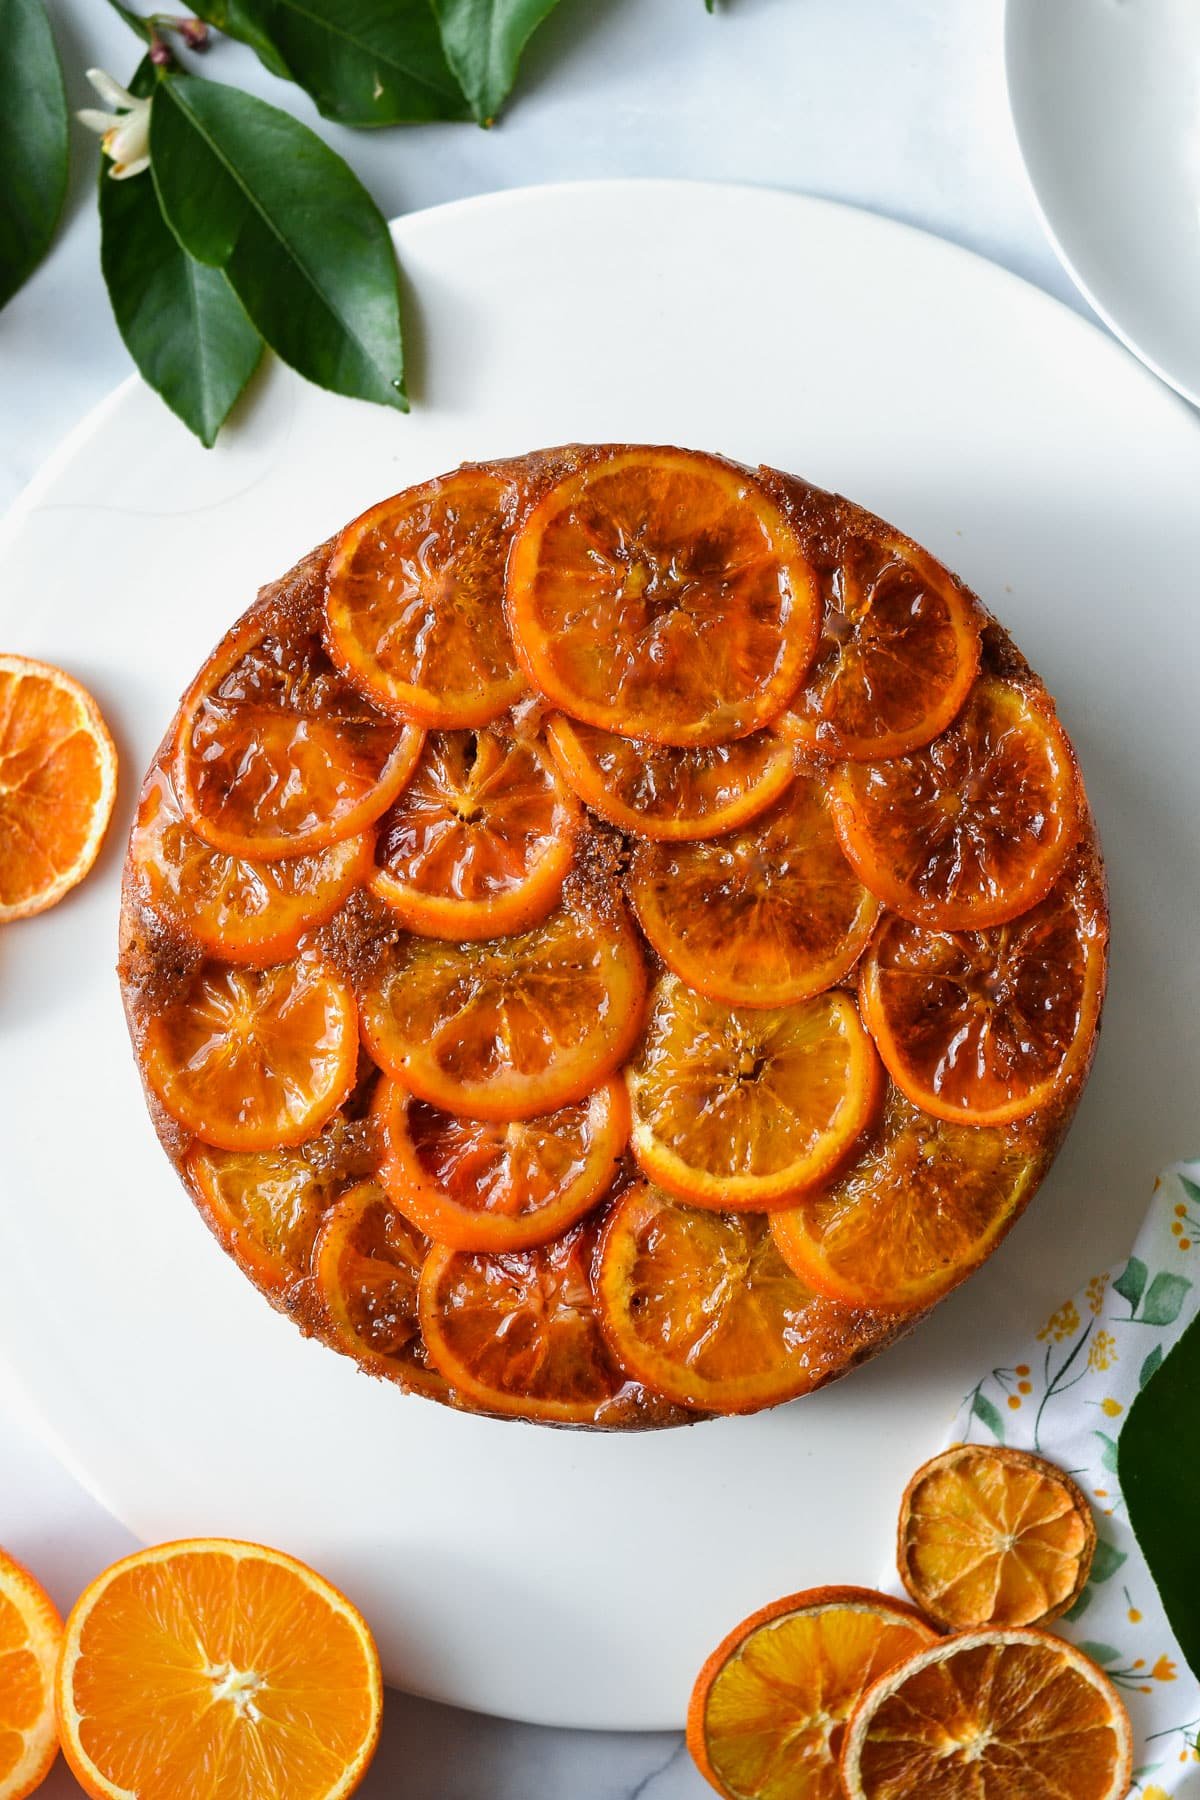 a whole cake, topped with orange slices, on a white plate.